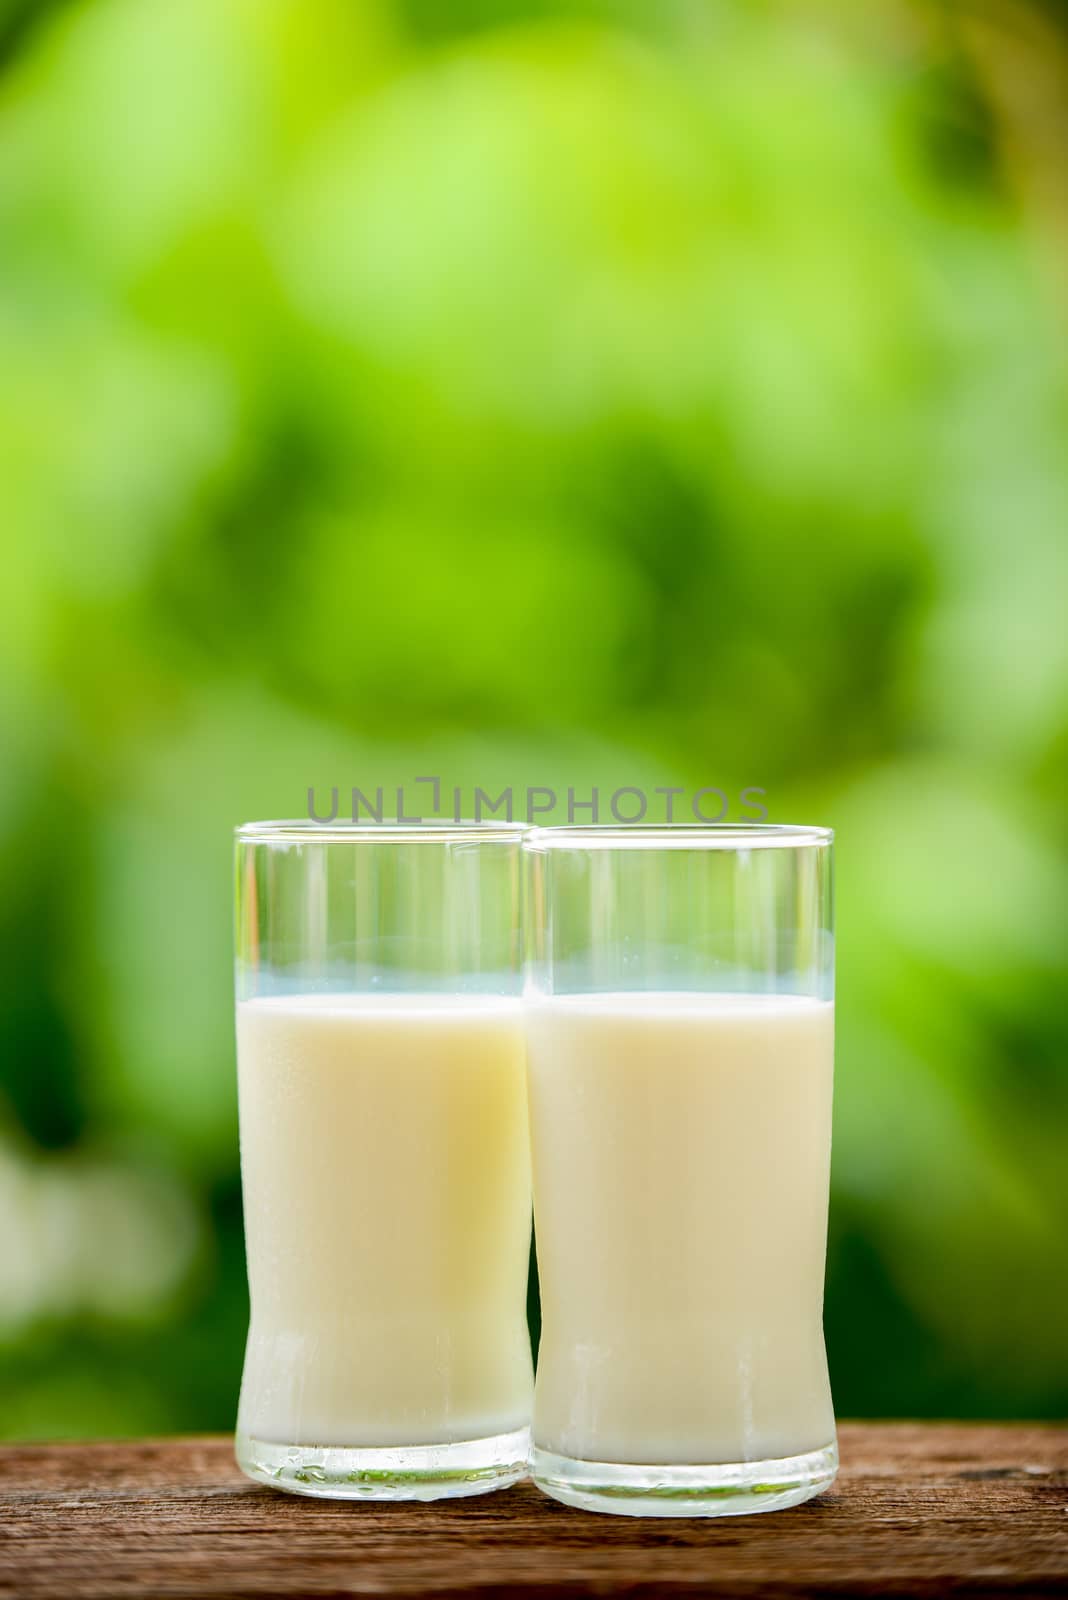 milk glass on table with nature background